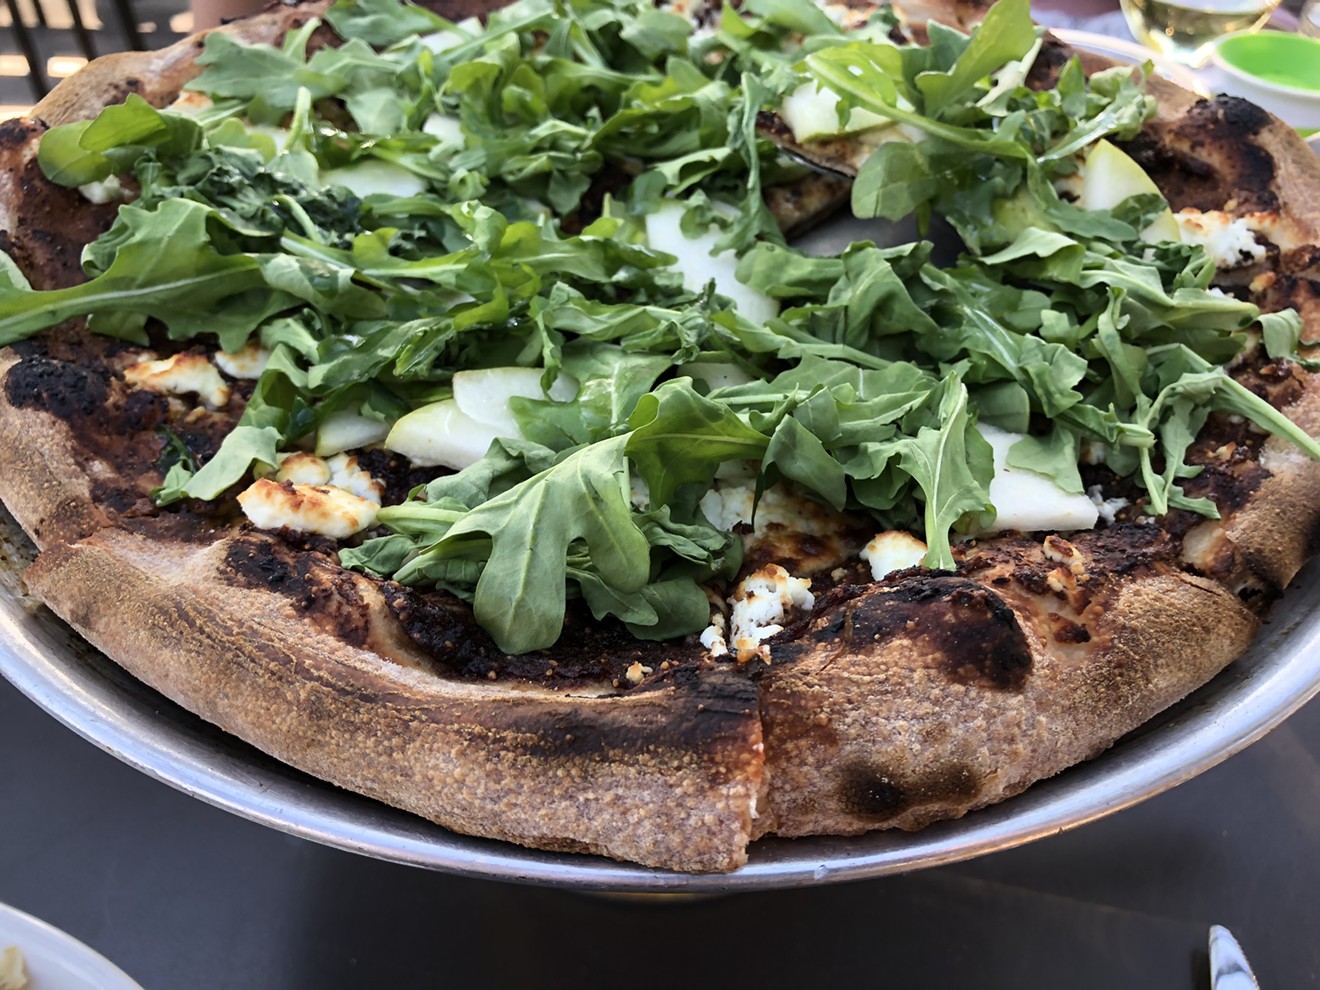 Pizza with truffle, figs, and arugula from Pitch.